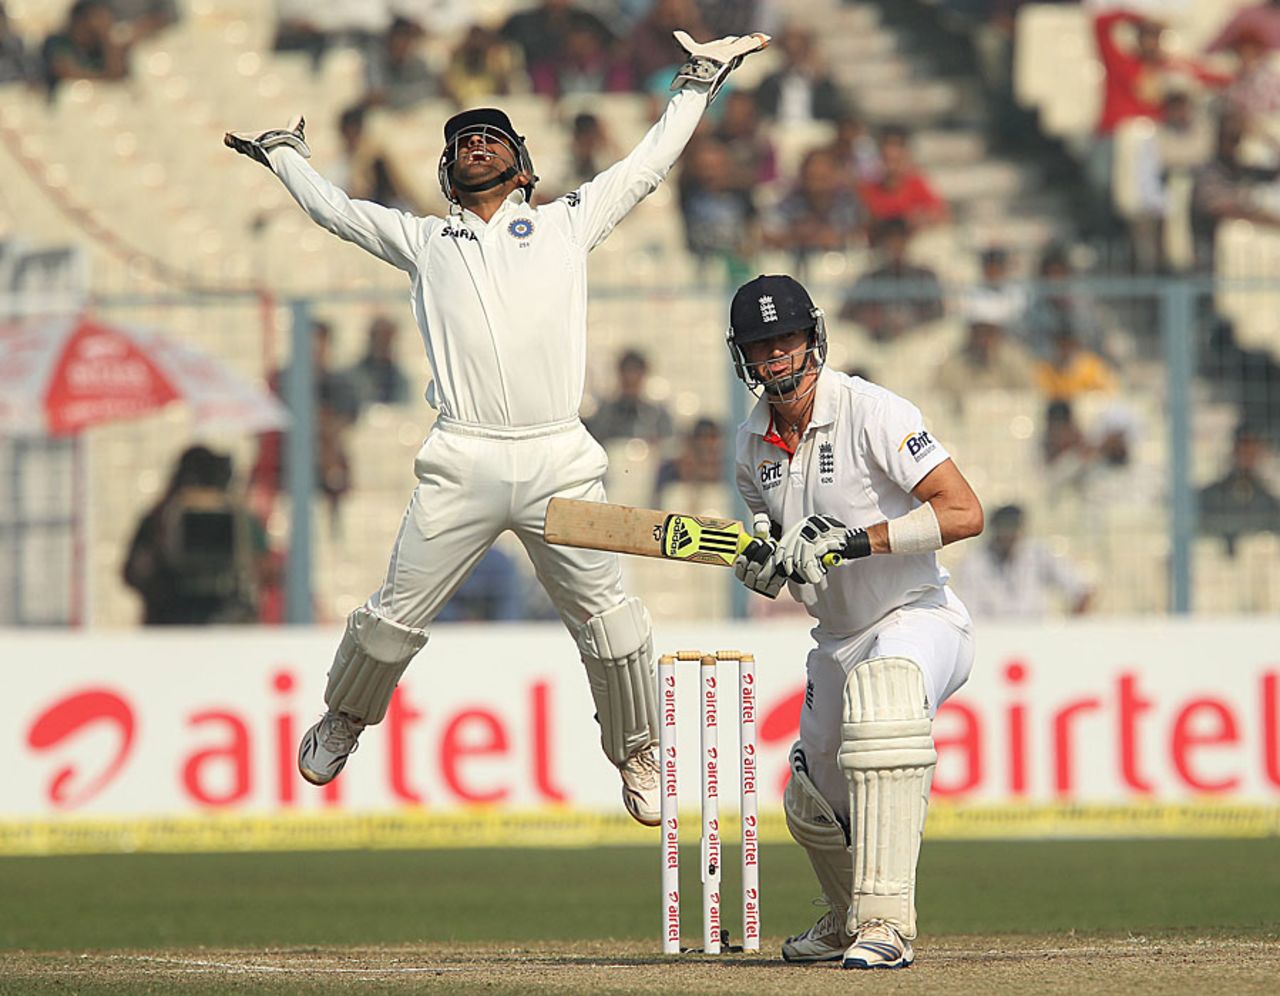 MS Dhoni leaps after taking a catch to get Kevin Pietersen out, India v England, 3rd Test, Kolkata, 5th day, December 8, 2012